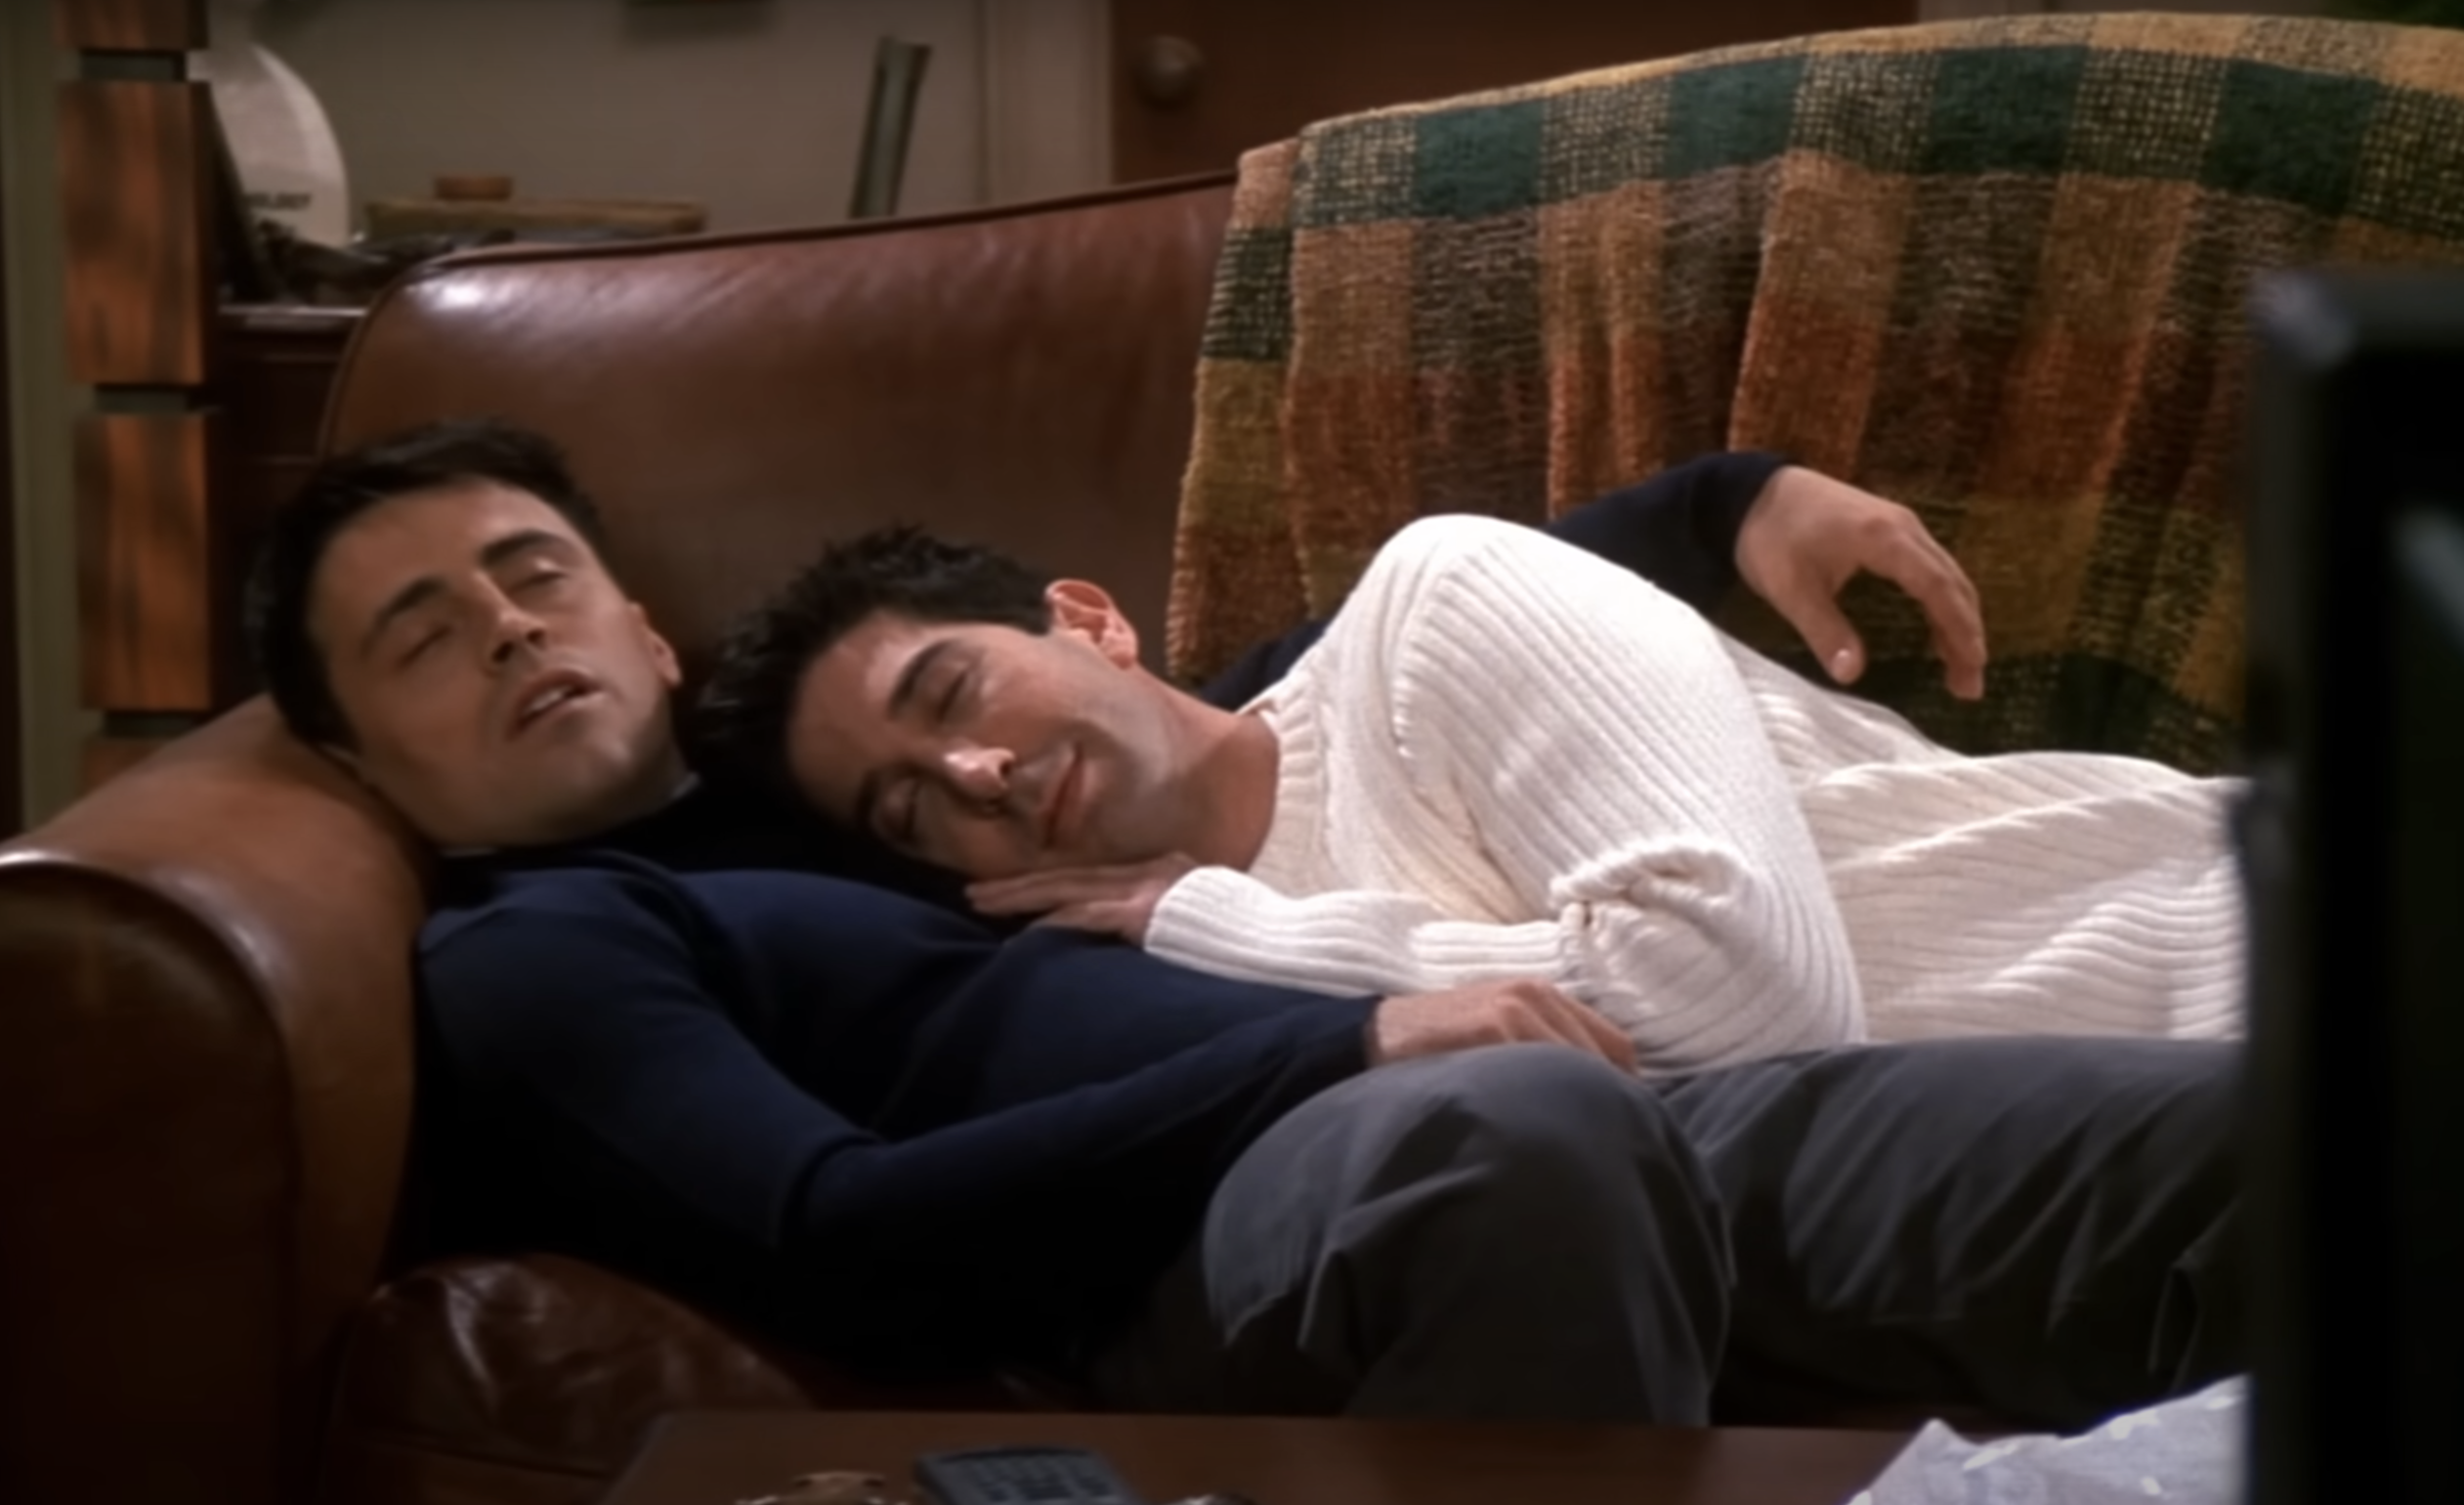 Joey and Ross from &quot;Friends&quot; asleep, cuddling on the couch